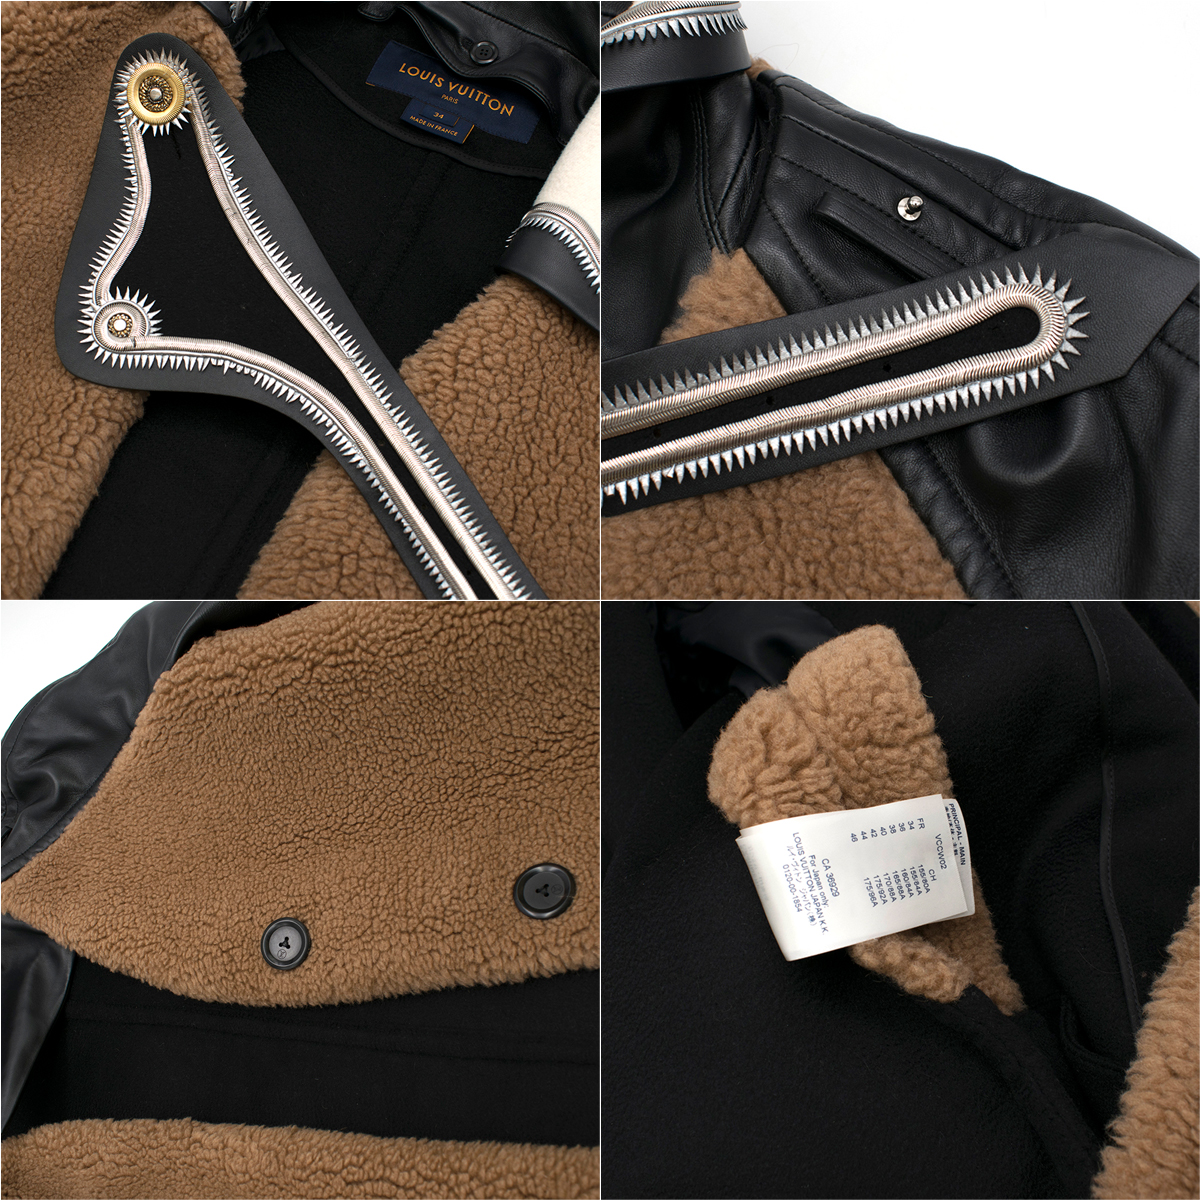 Louis Vuitton Leather Paneled Teddy Bear Coat With Leather Sleeves | HEWI